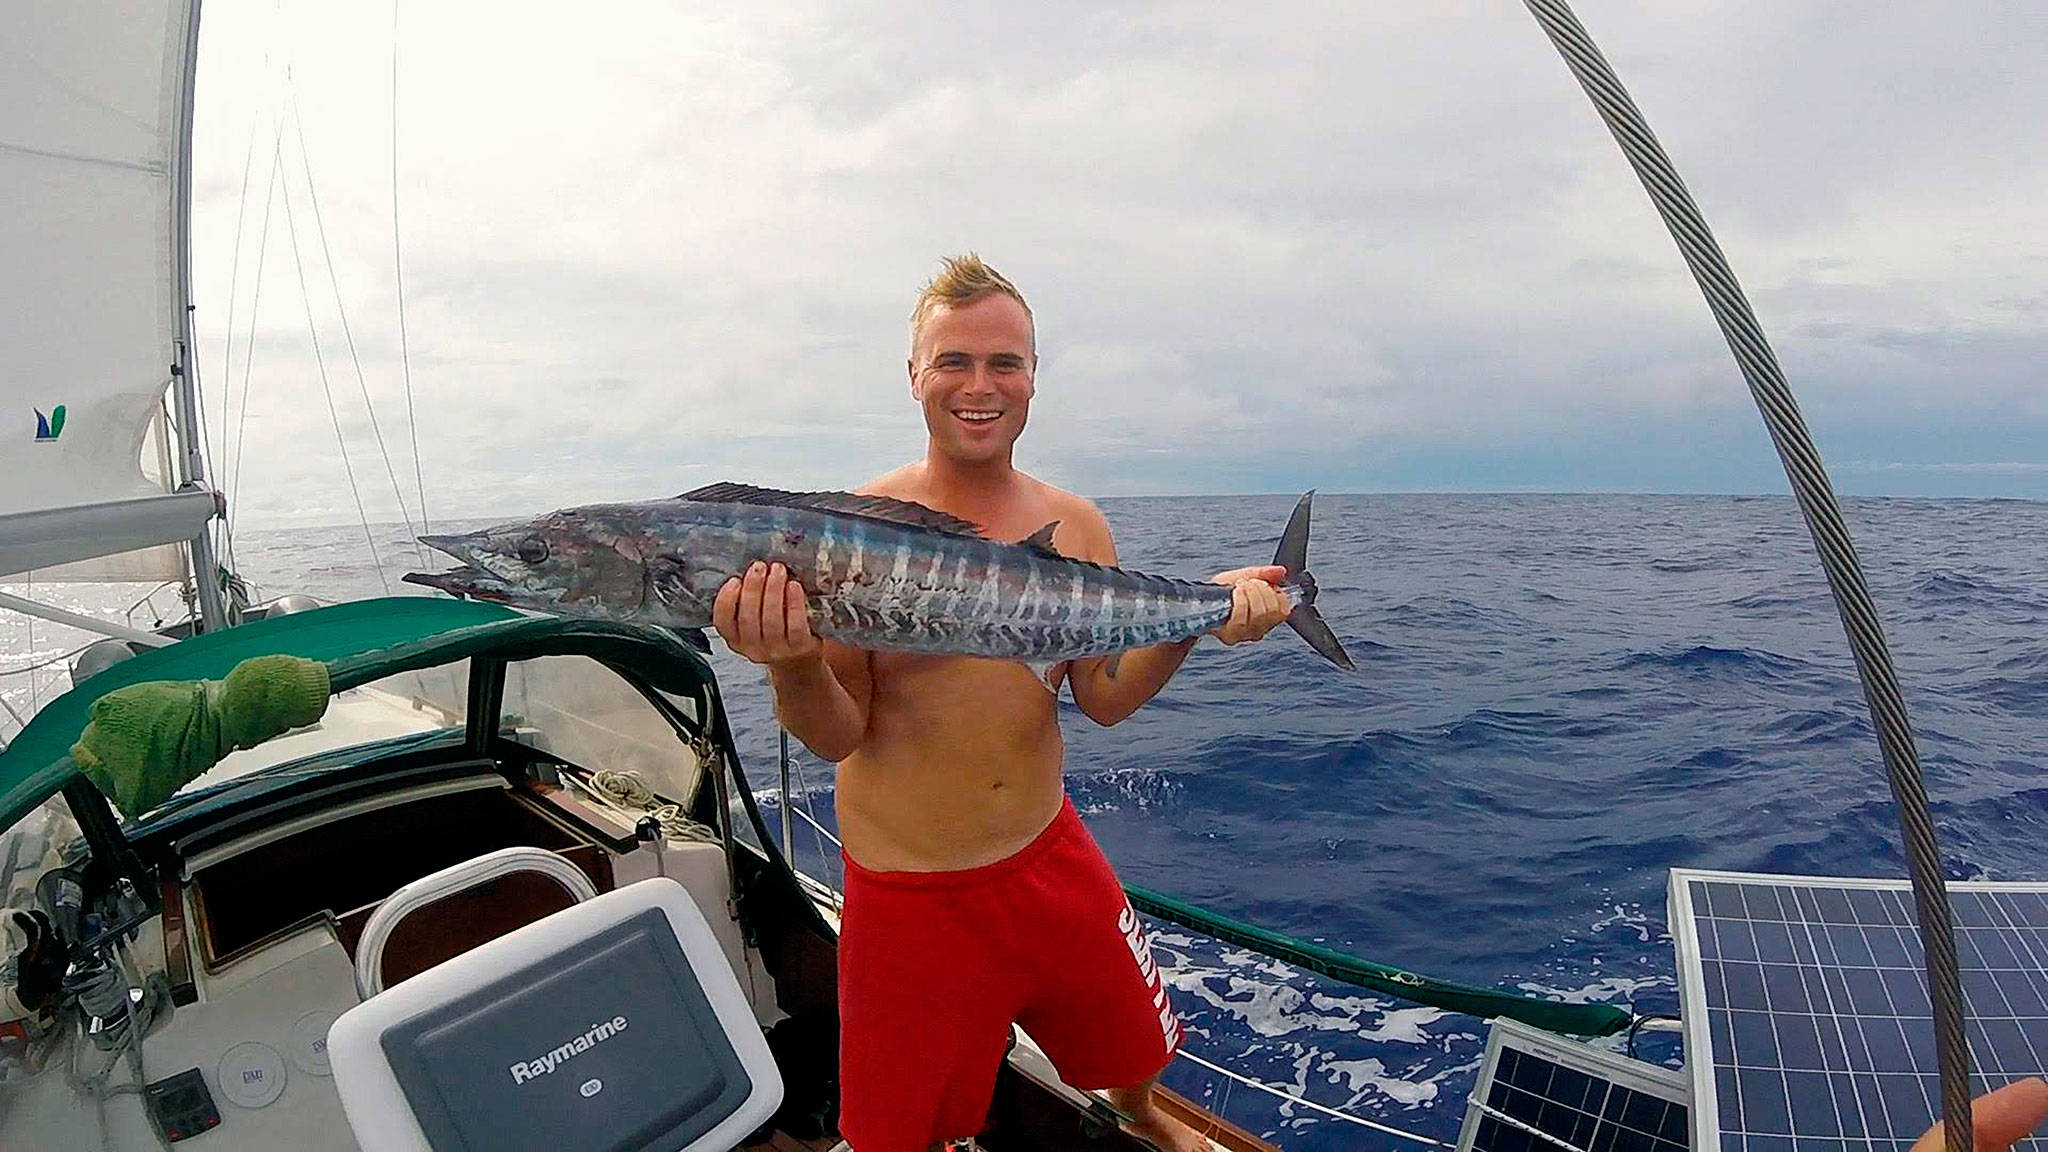 Andy Stephens holds a Wahoo fish caught from his 30-foot sailboat about 100 miles west of Pohnpei, Micronesia, in the Pacific. The 33-year-old Everett native left on a round-the-world sailing trip in July. He is home in Everett this month, but will soon fly back to the Philippines where his boat is now moored. (Courtesy Andy Stephens)